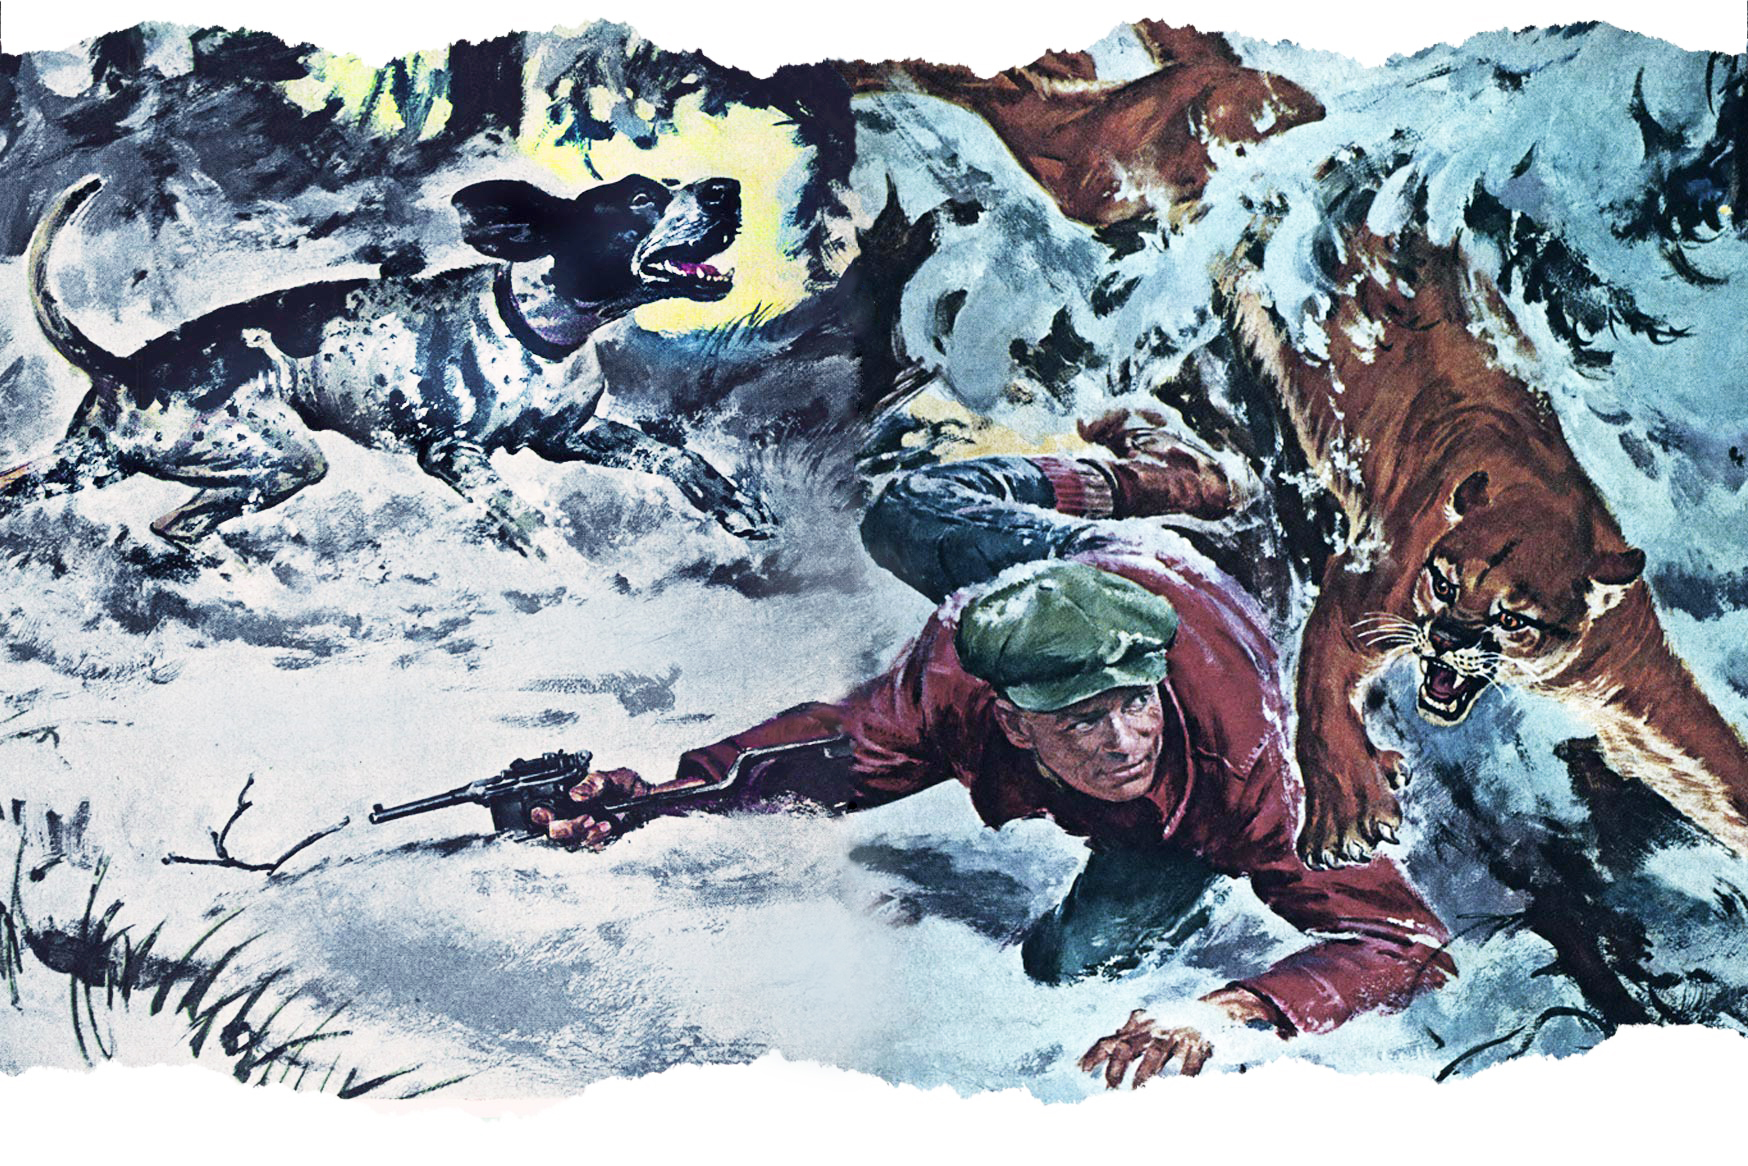 magazine pages showing cougar attacking hunter